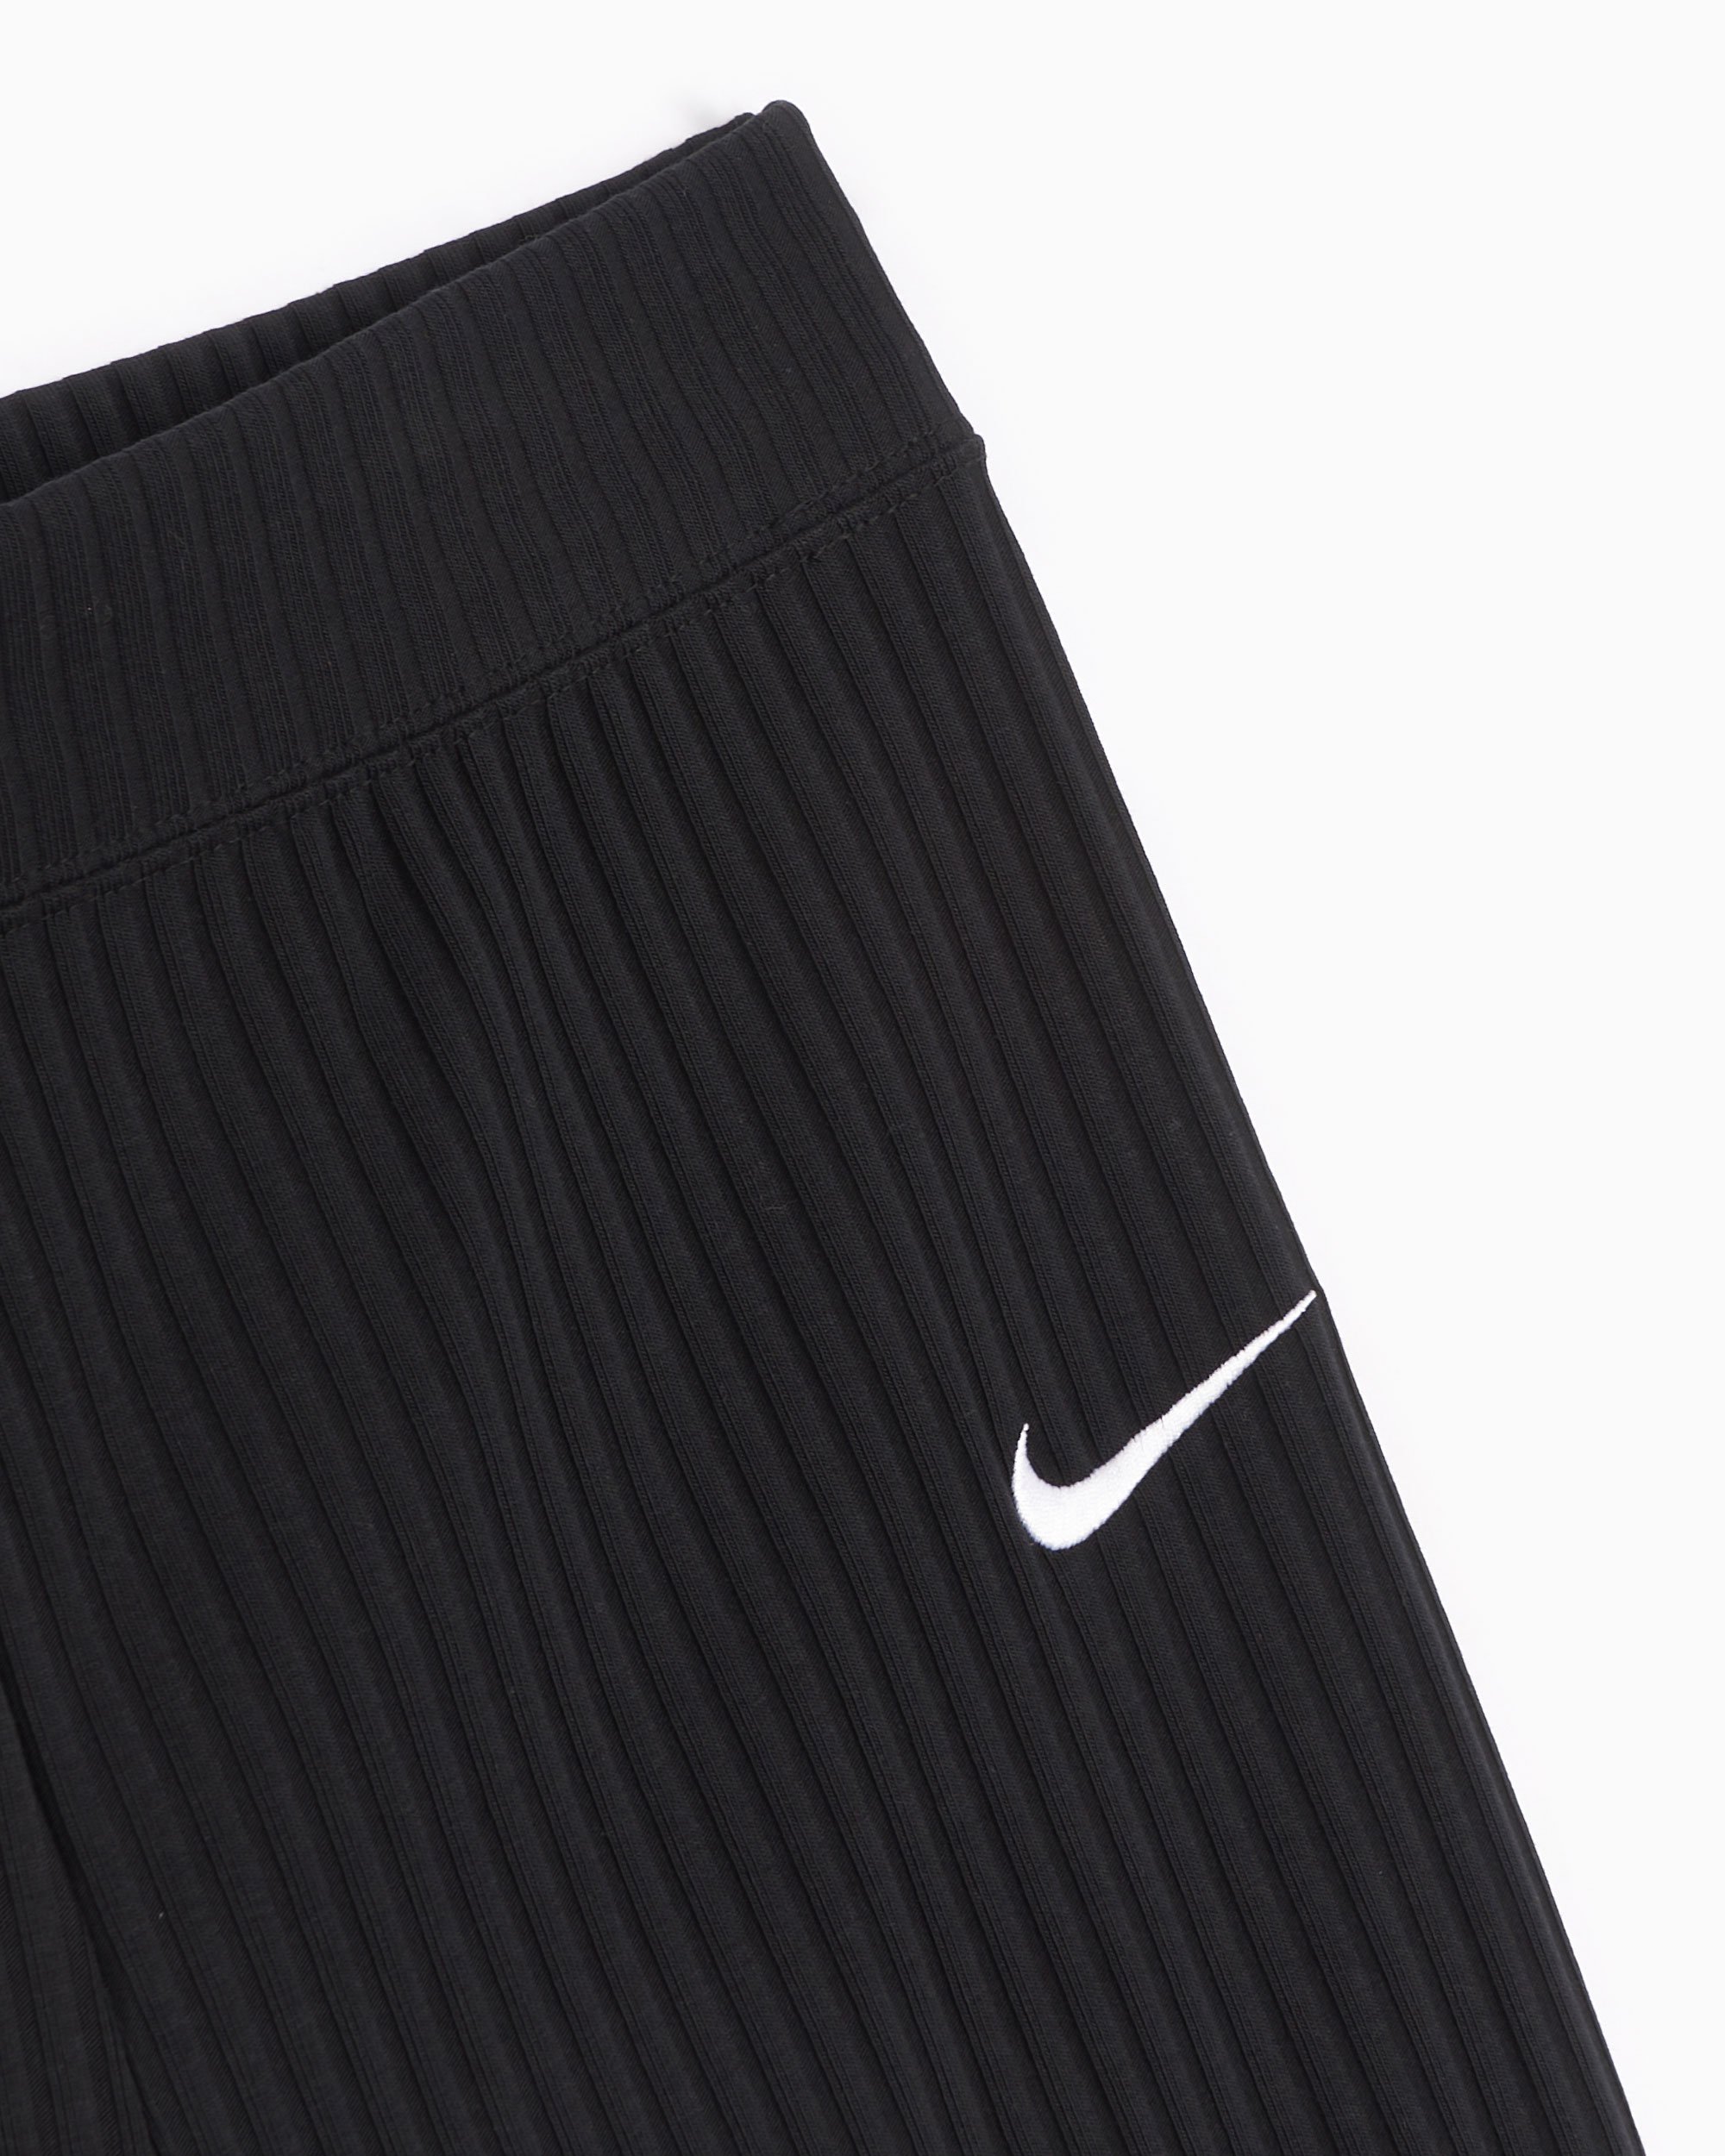 Used Nike Bliss Victory Pants